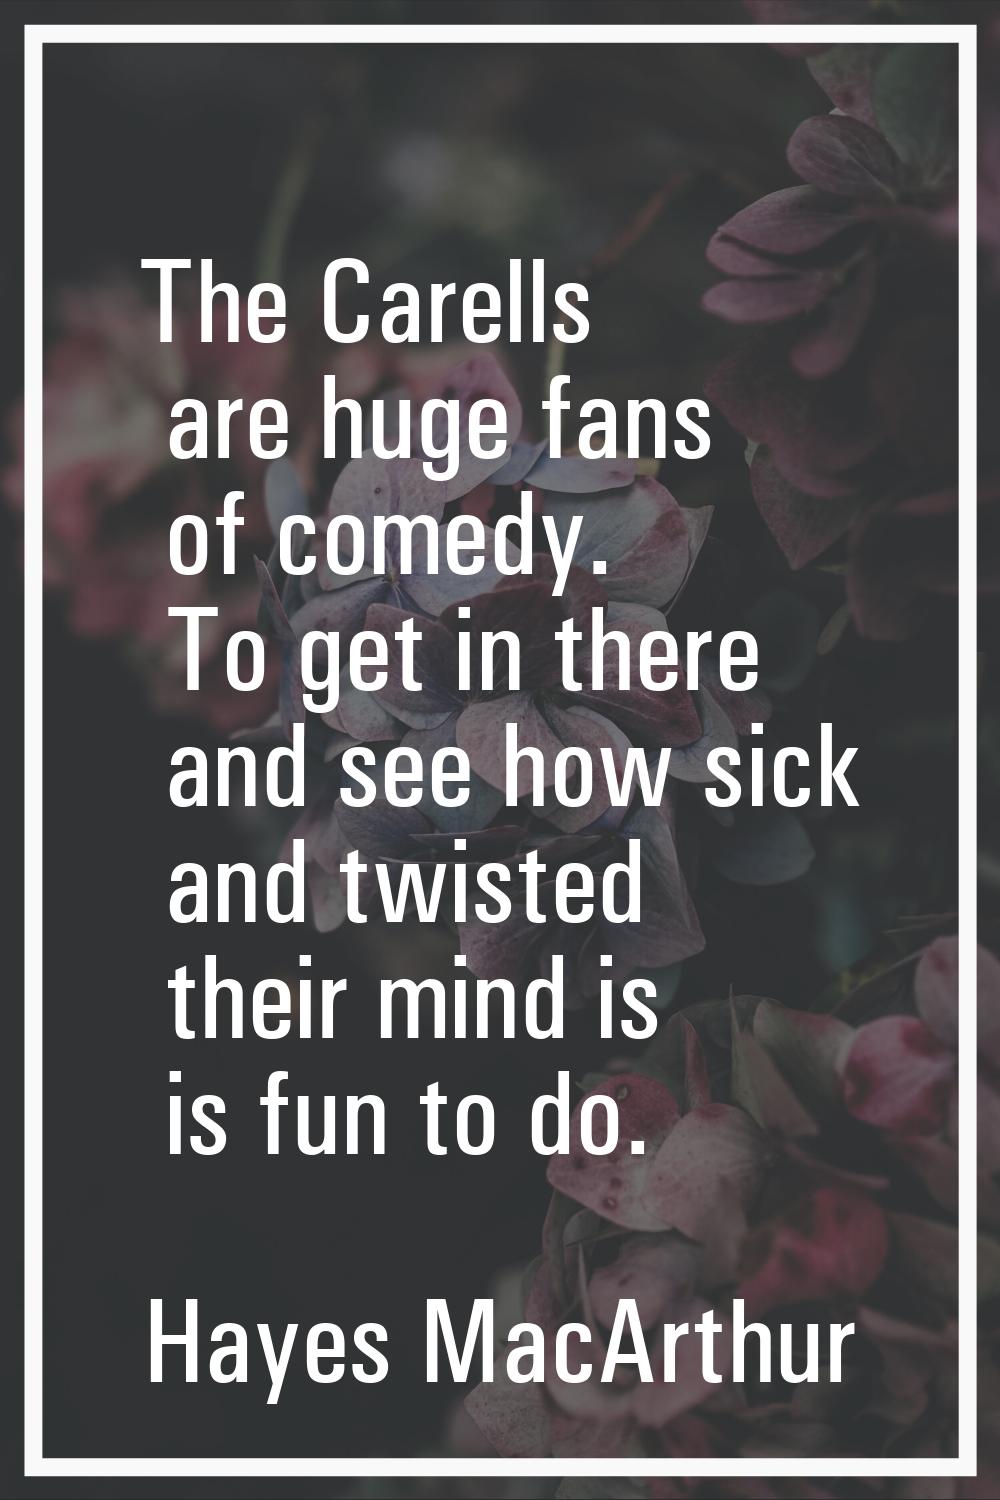 The Carells are huge fans of comedy. To get in there and see how sick and twisted their mind is is 